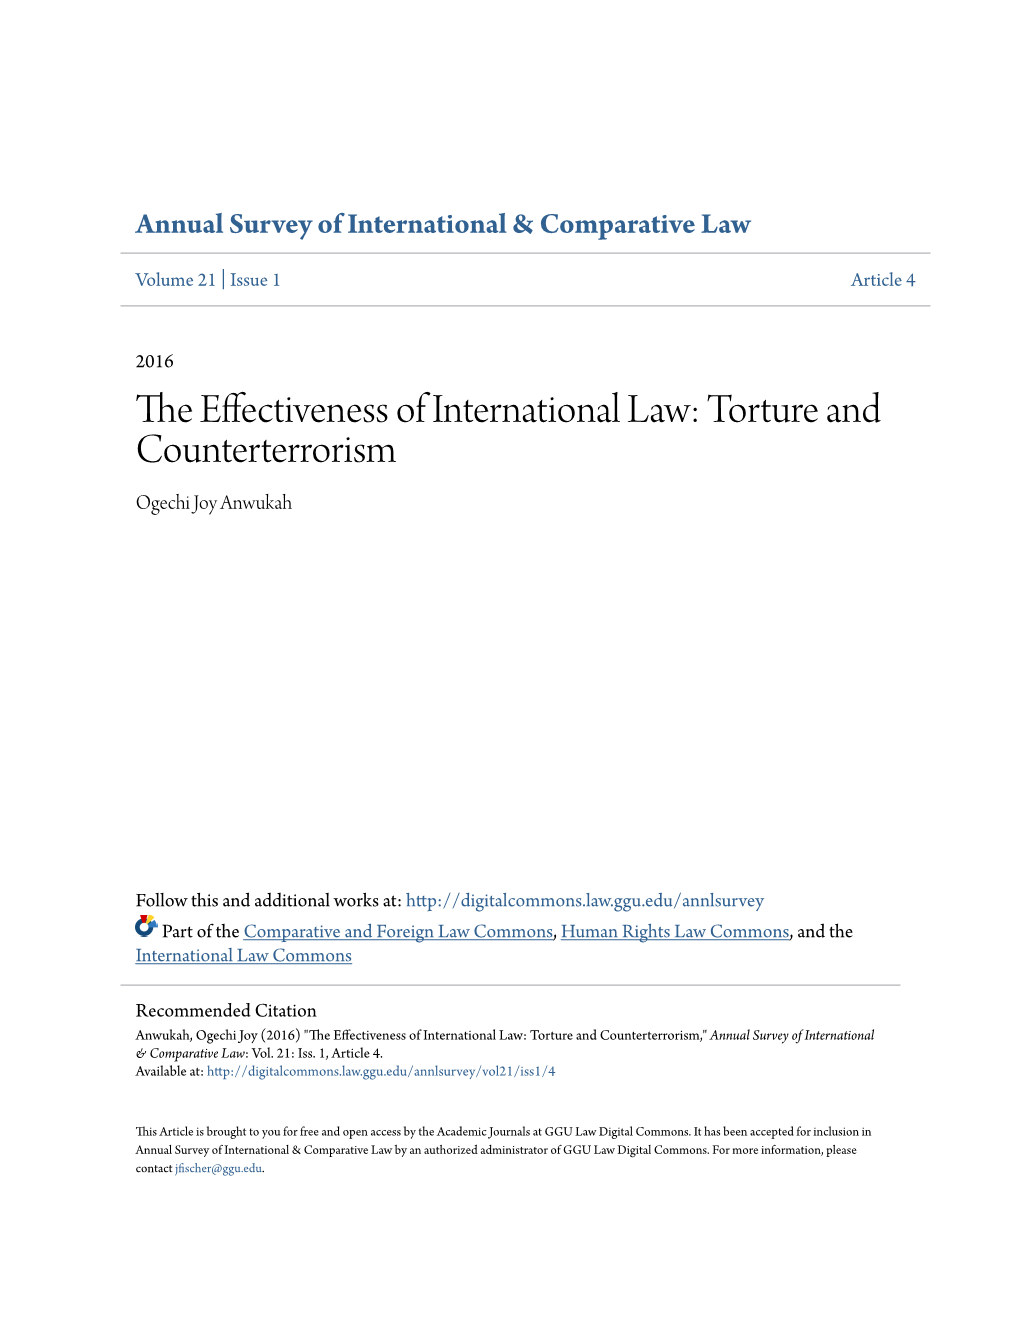 The Effectiveness of International Law: Torture and Counterterrorism," Annual Survey of International & Comparative Law: Vol